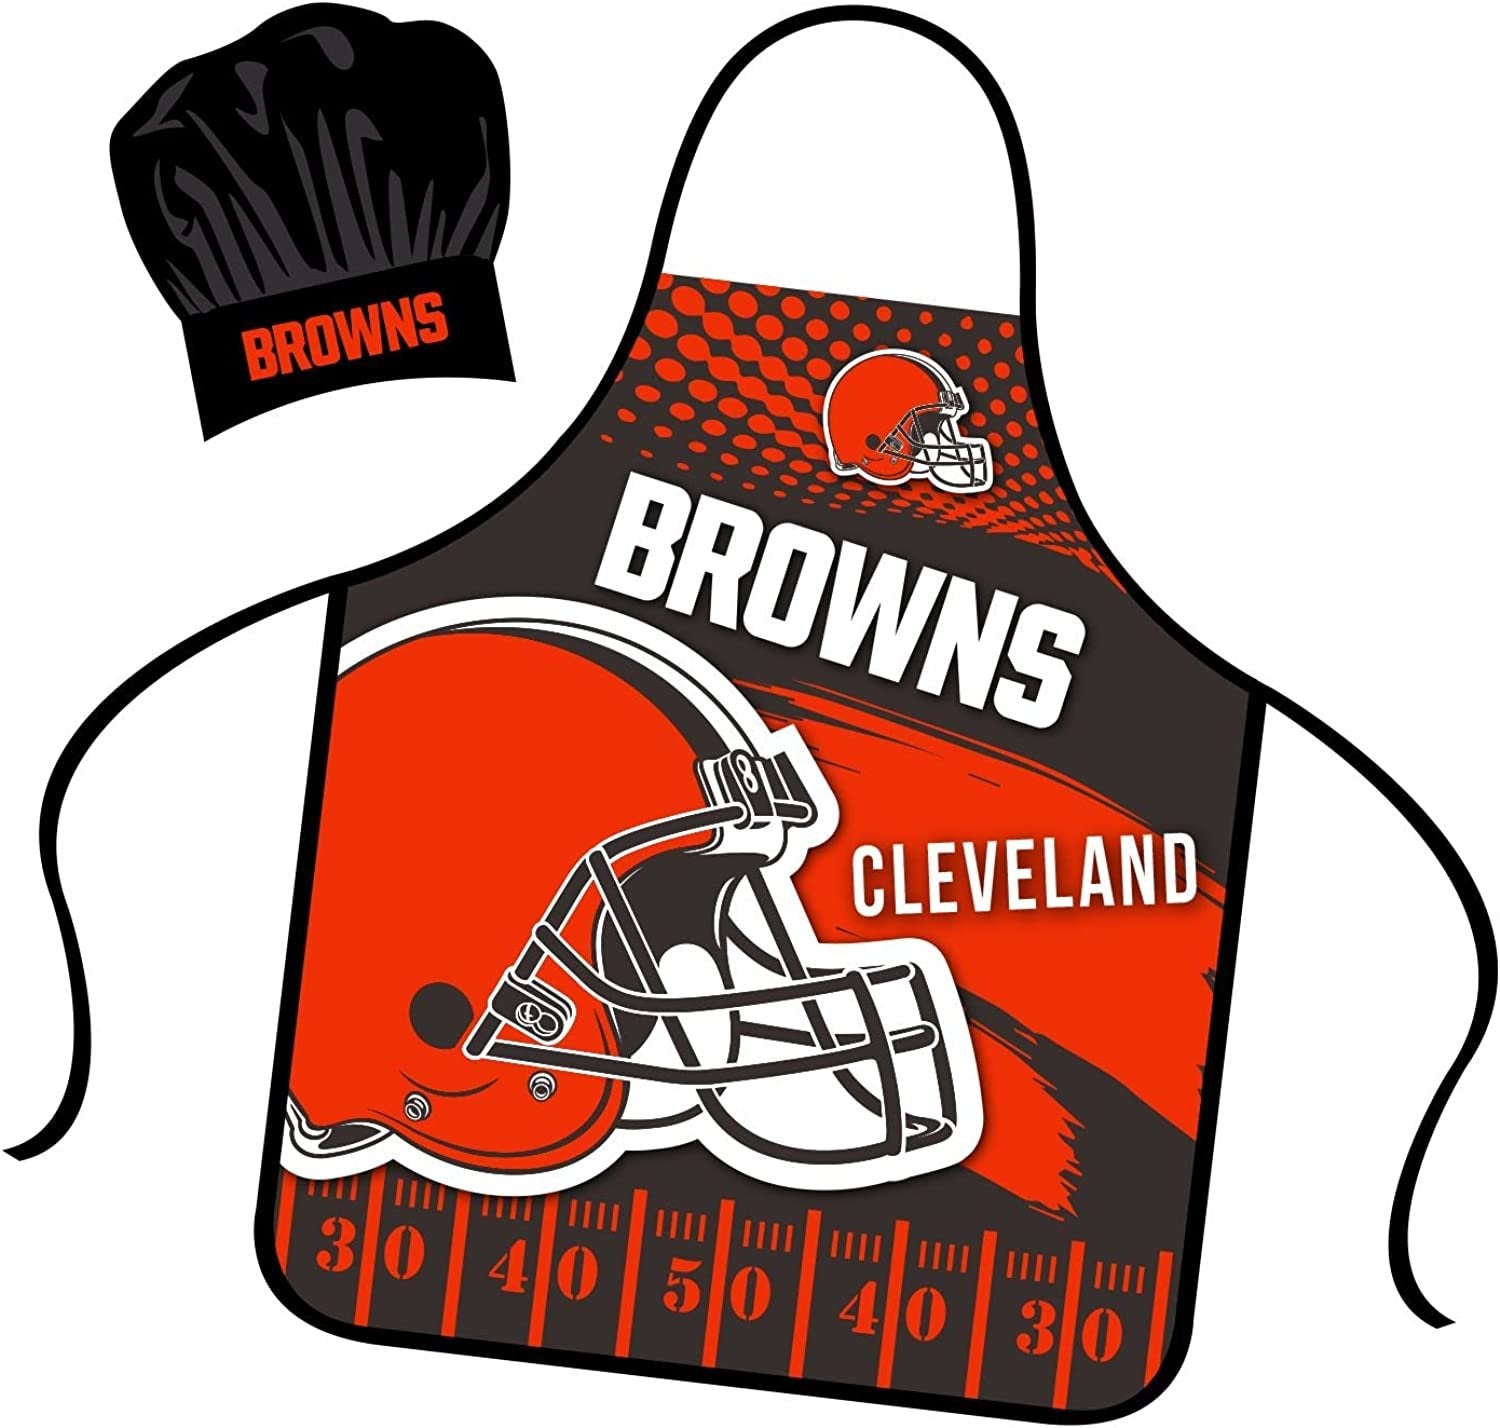 Cleveland Browns Apron Chef Hat Set Full Color Universal Size Tie Back Grilling Tailgate BBQ Cooking Host